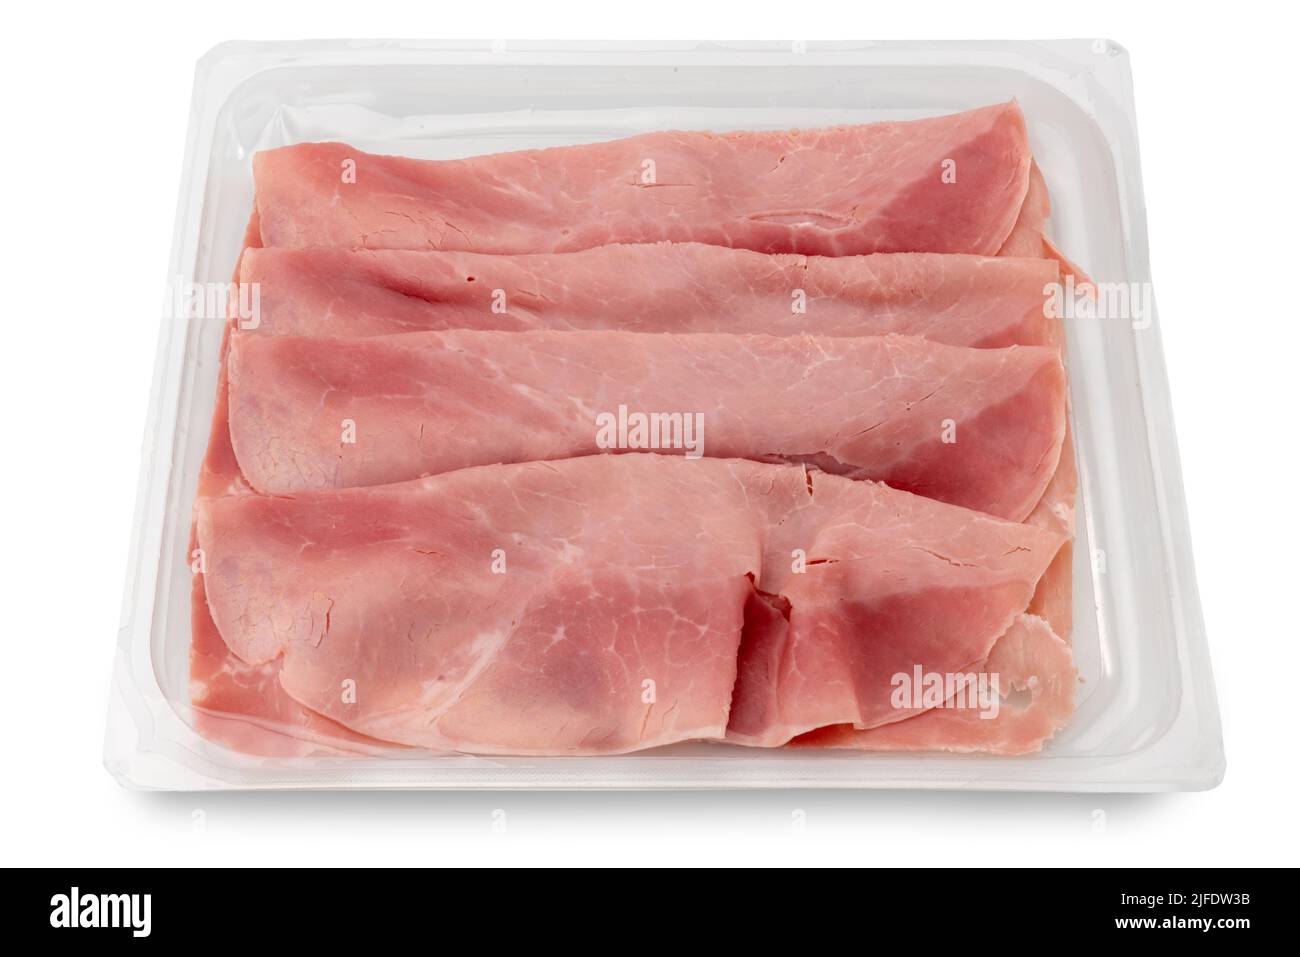 Slices of cooked ham in plastic food tray for sale in supermarket, Top view isolated on white with clipping path included. Stock Photo